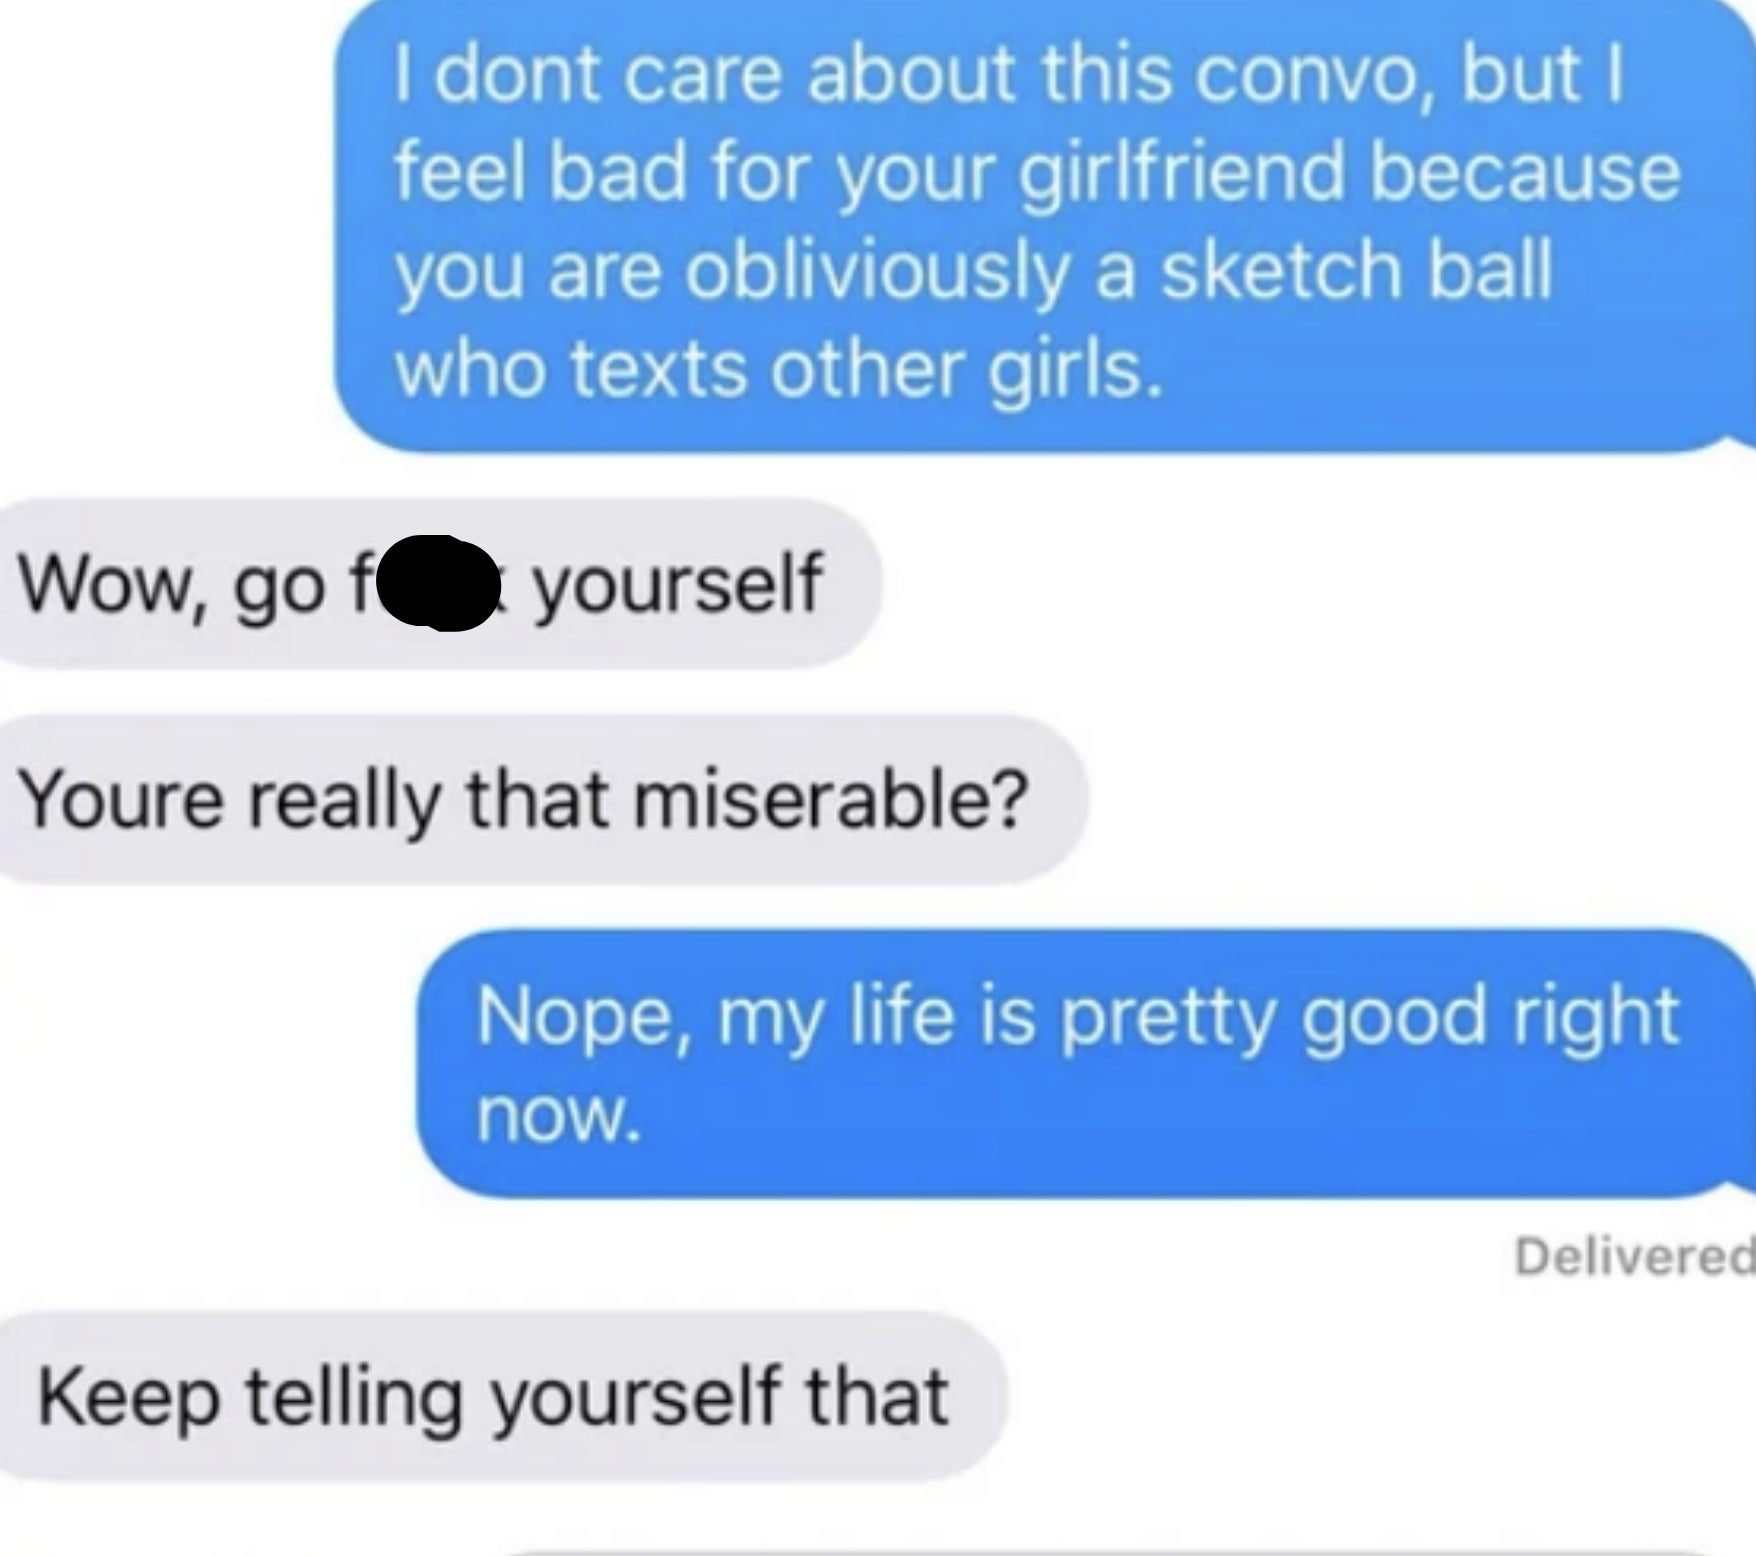 She says &quot;I feel bad for your girlfriend because you are obviously a sketch ball who texts other girls,&quot; &quot;Wow, go fuck. yourself; you&#x27;re really that miserable?&quot; &quot;Nope, my life is pretty good right now,&quot; &quot;Keep telling yourself that&quot;